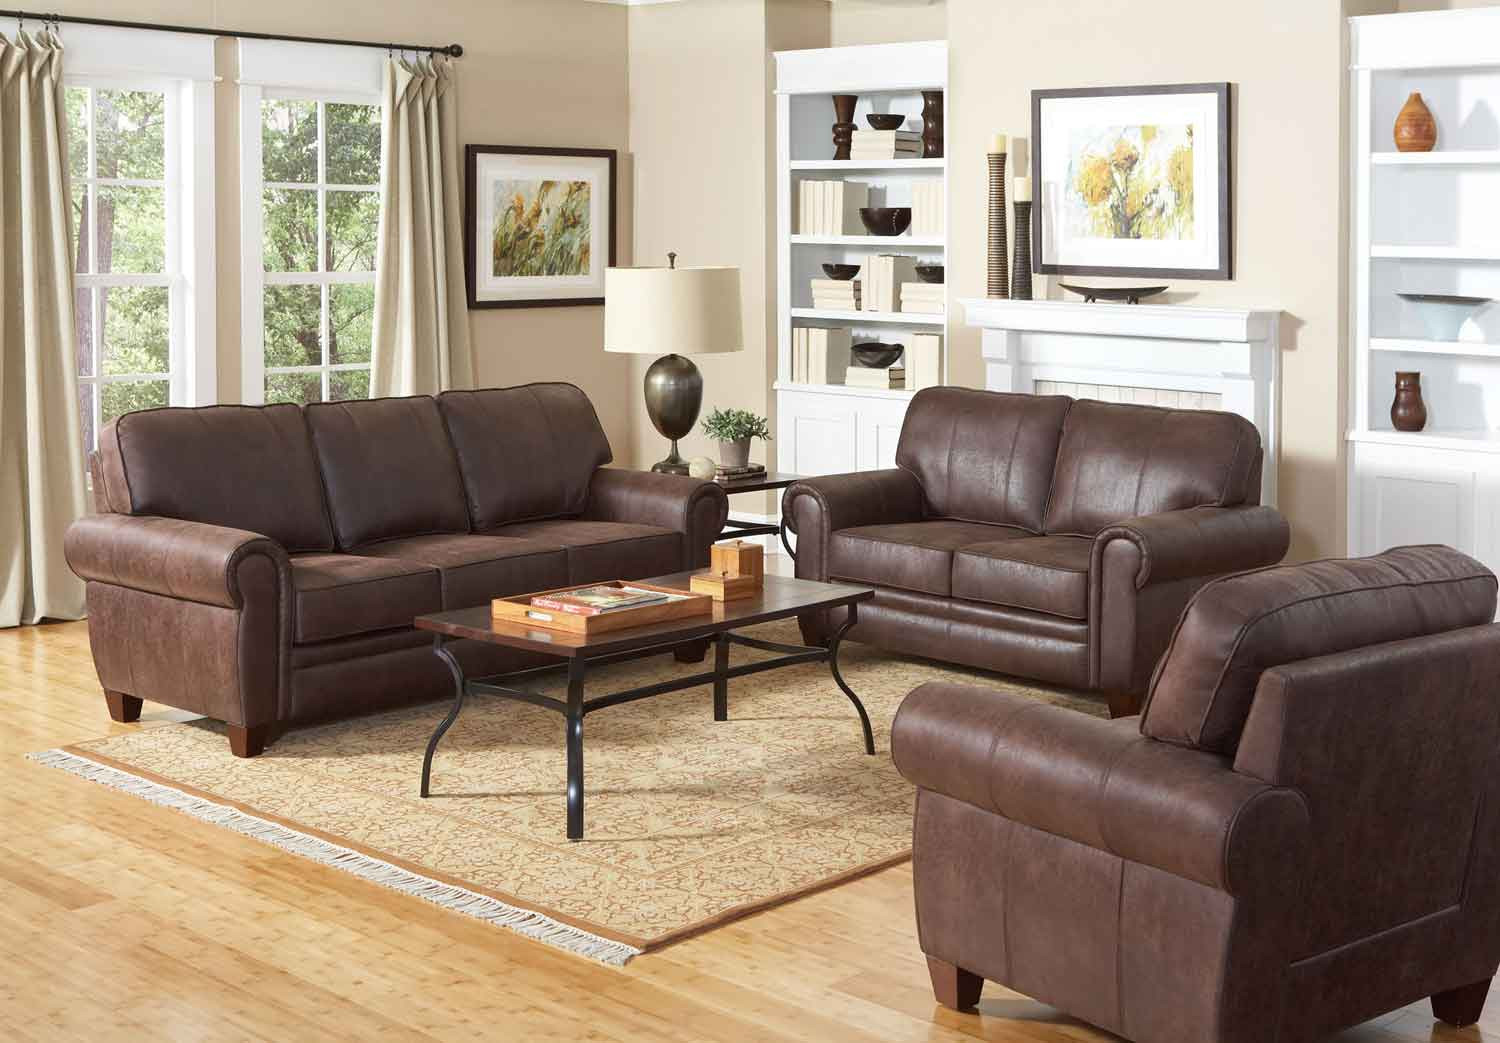 Best ideas about Living Room Chair
. Save or Pin Coaster Bentley Living Room Set Brown LivSet at Now.